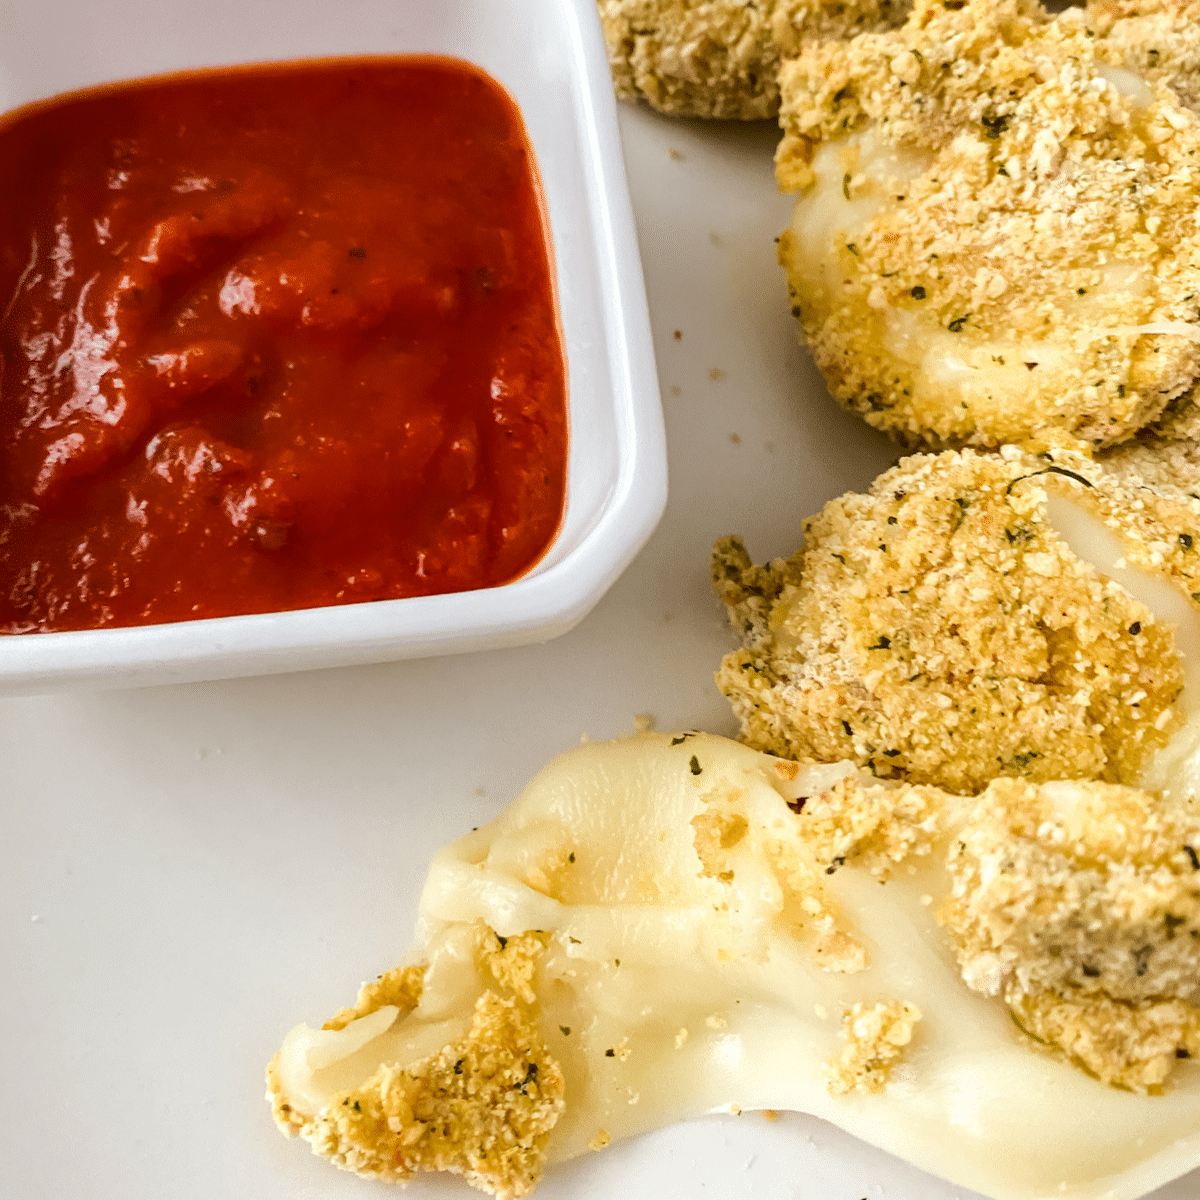 Coated cheese rounds on plate